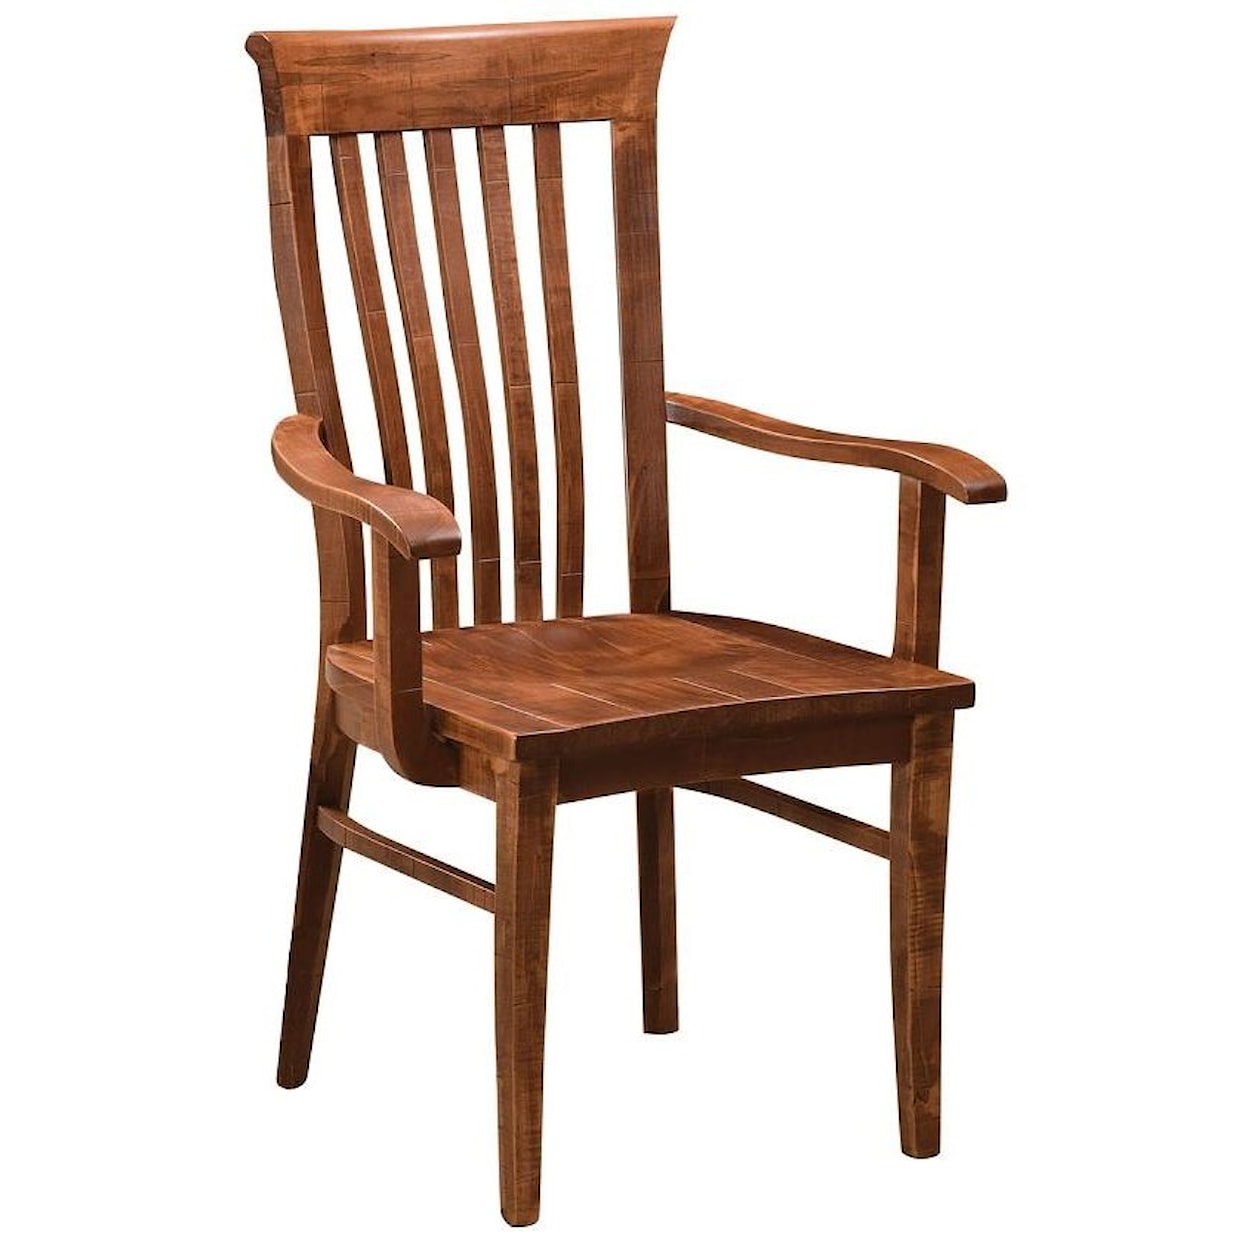 Country Comfort Woodworking Danbury Arm Chair